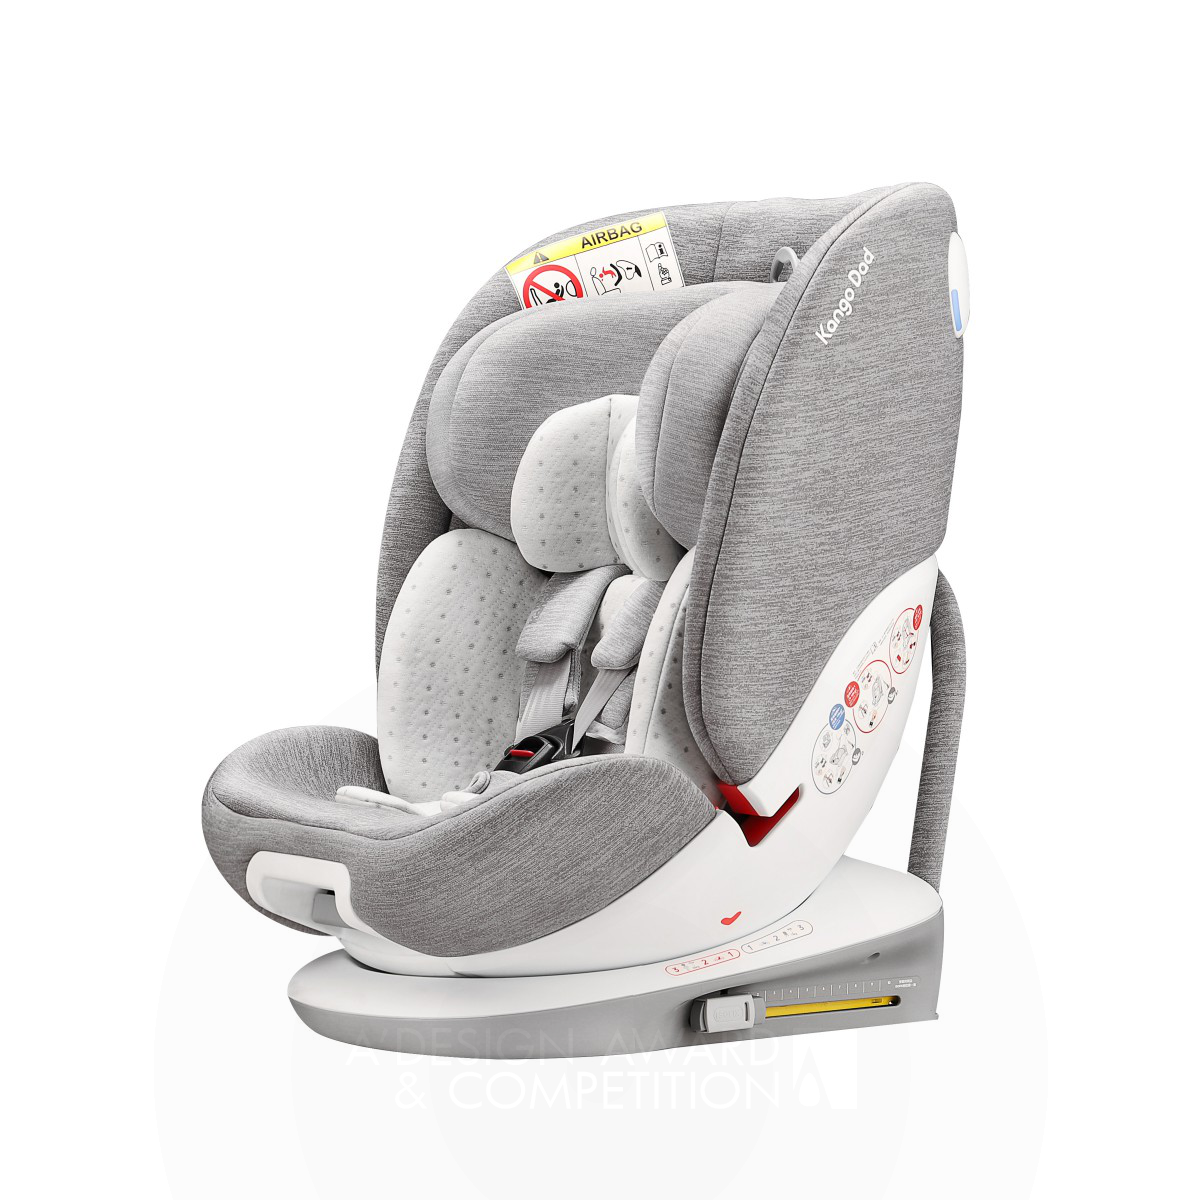 Ningbo Baby First Baby Products Co., Ltd. Baby Car Seat 